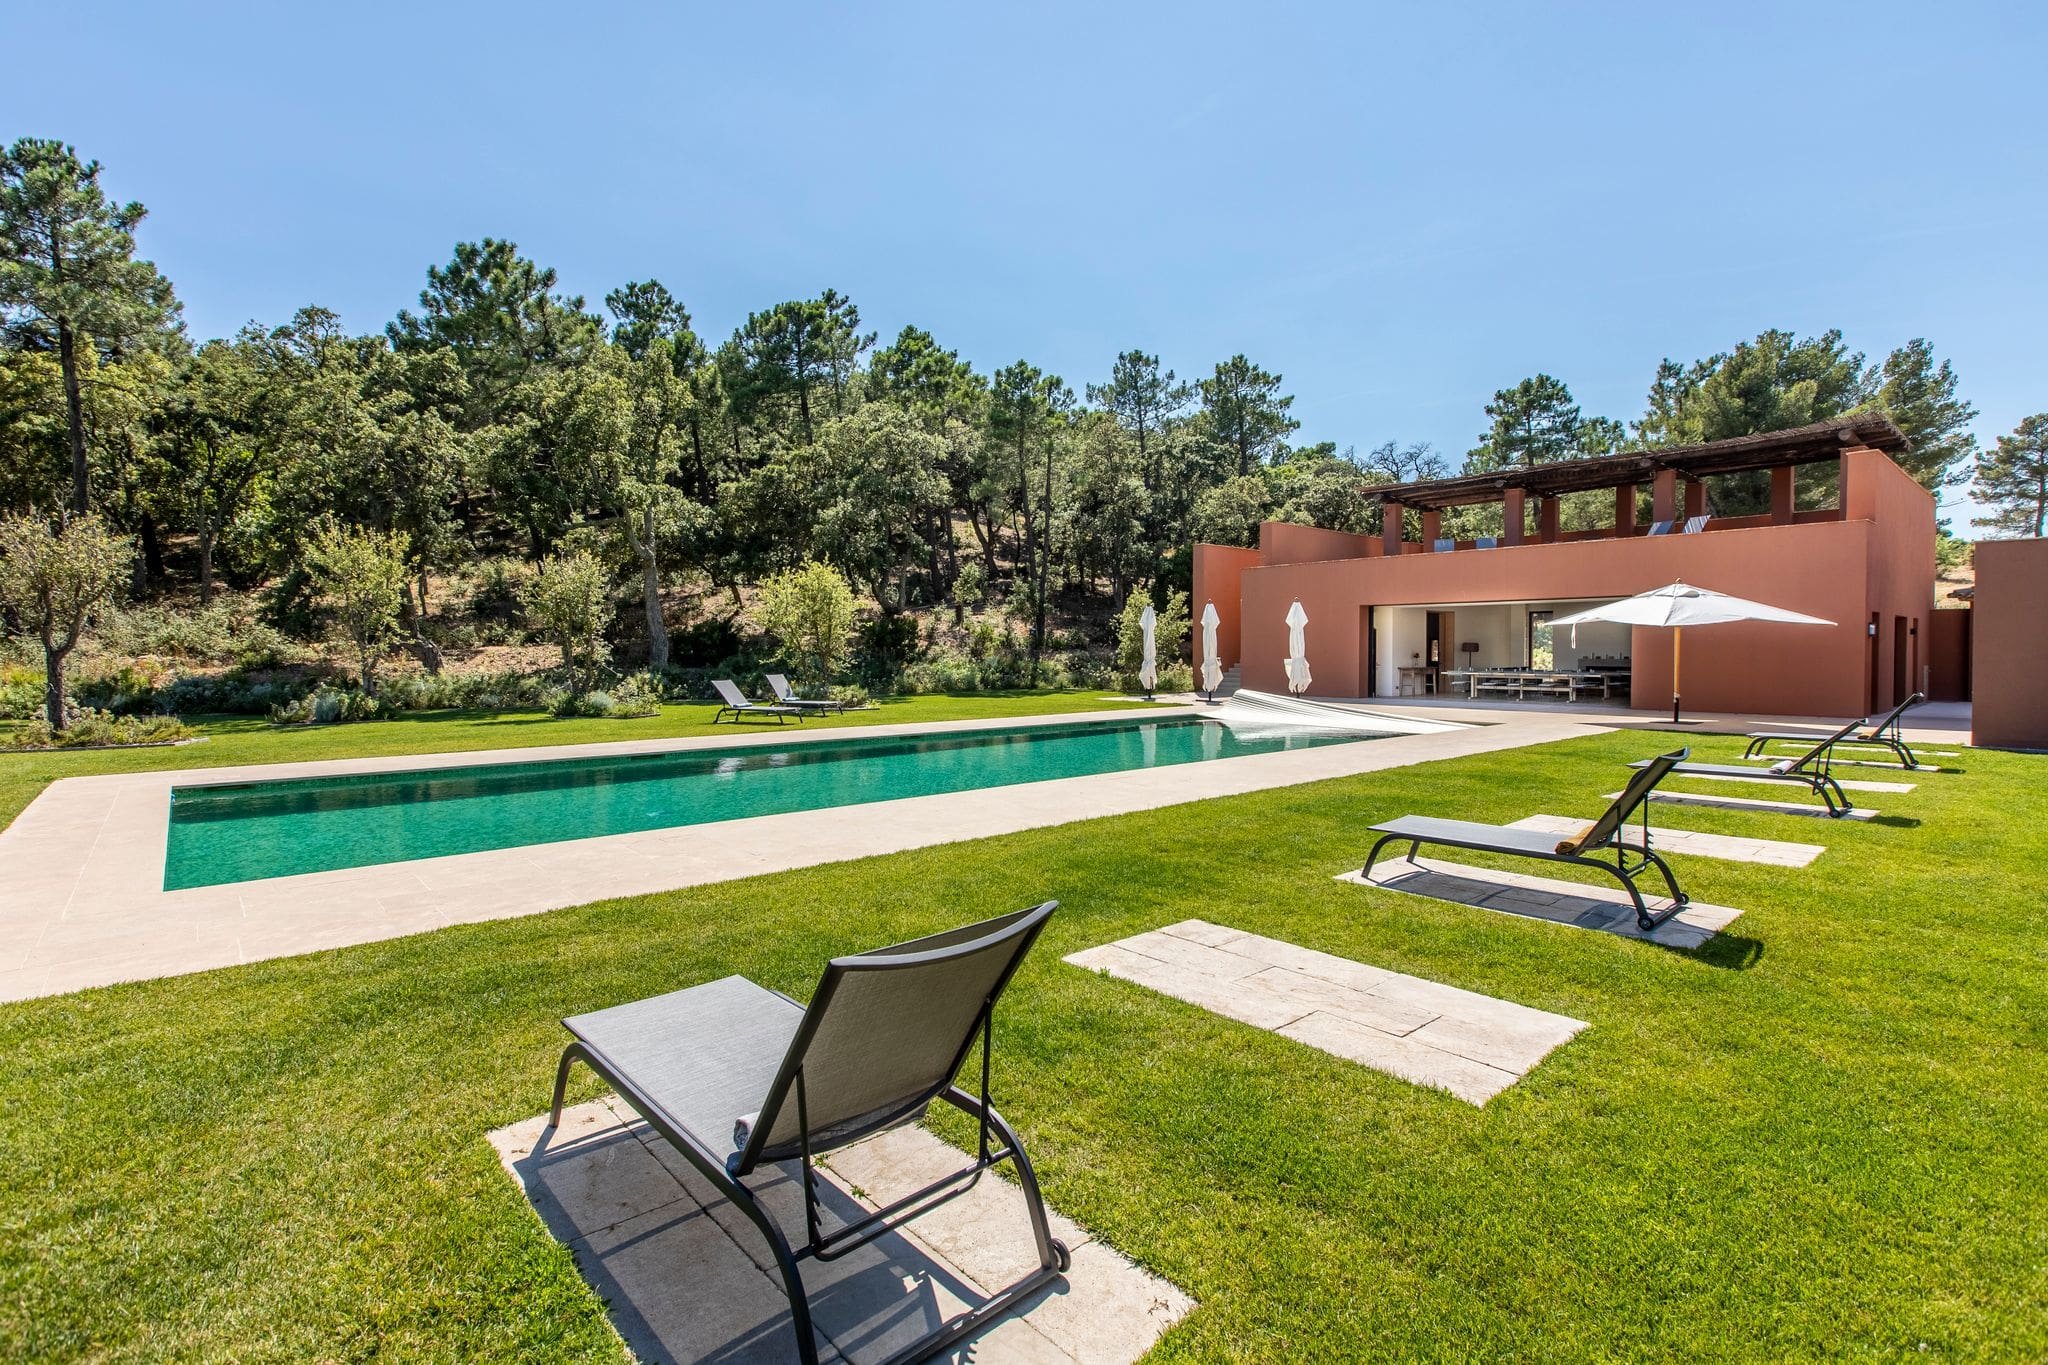 Luxury villa for rent on the cote d'azur near st tropez with sea view and large swimming pool